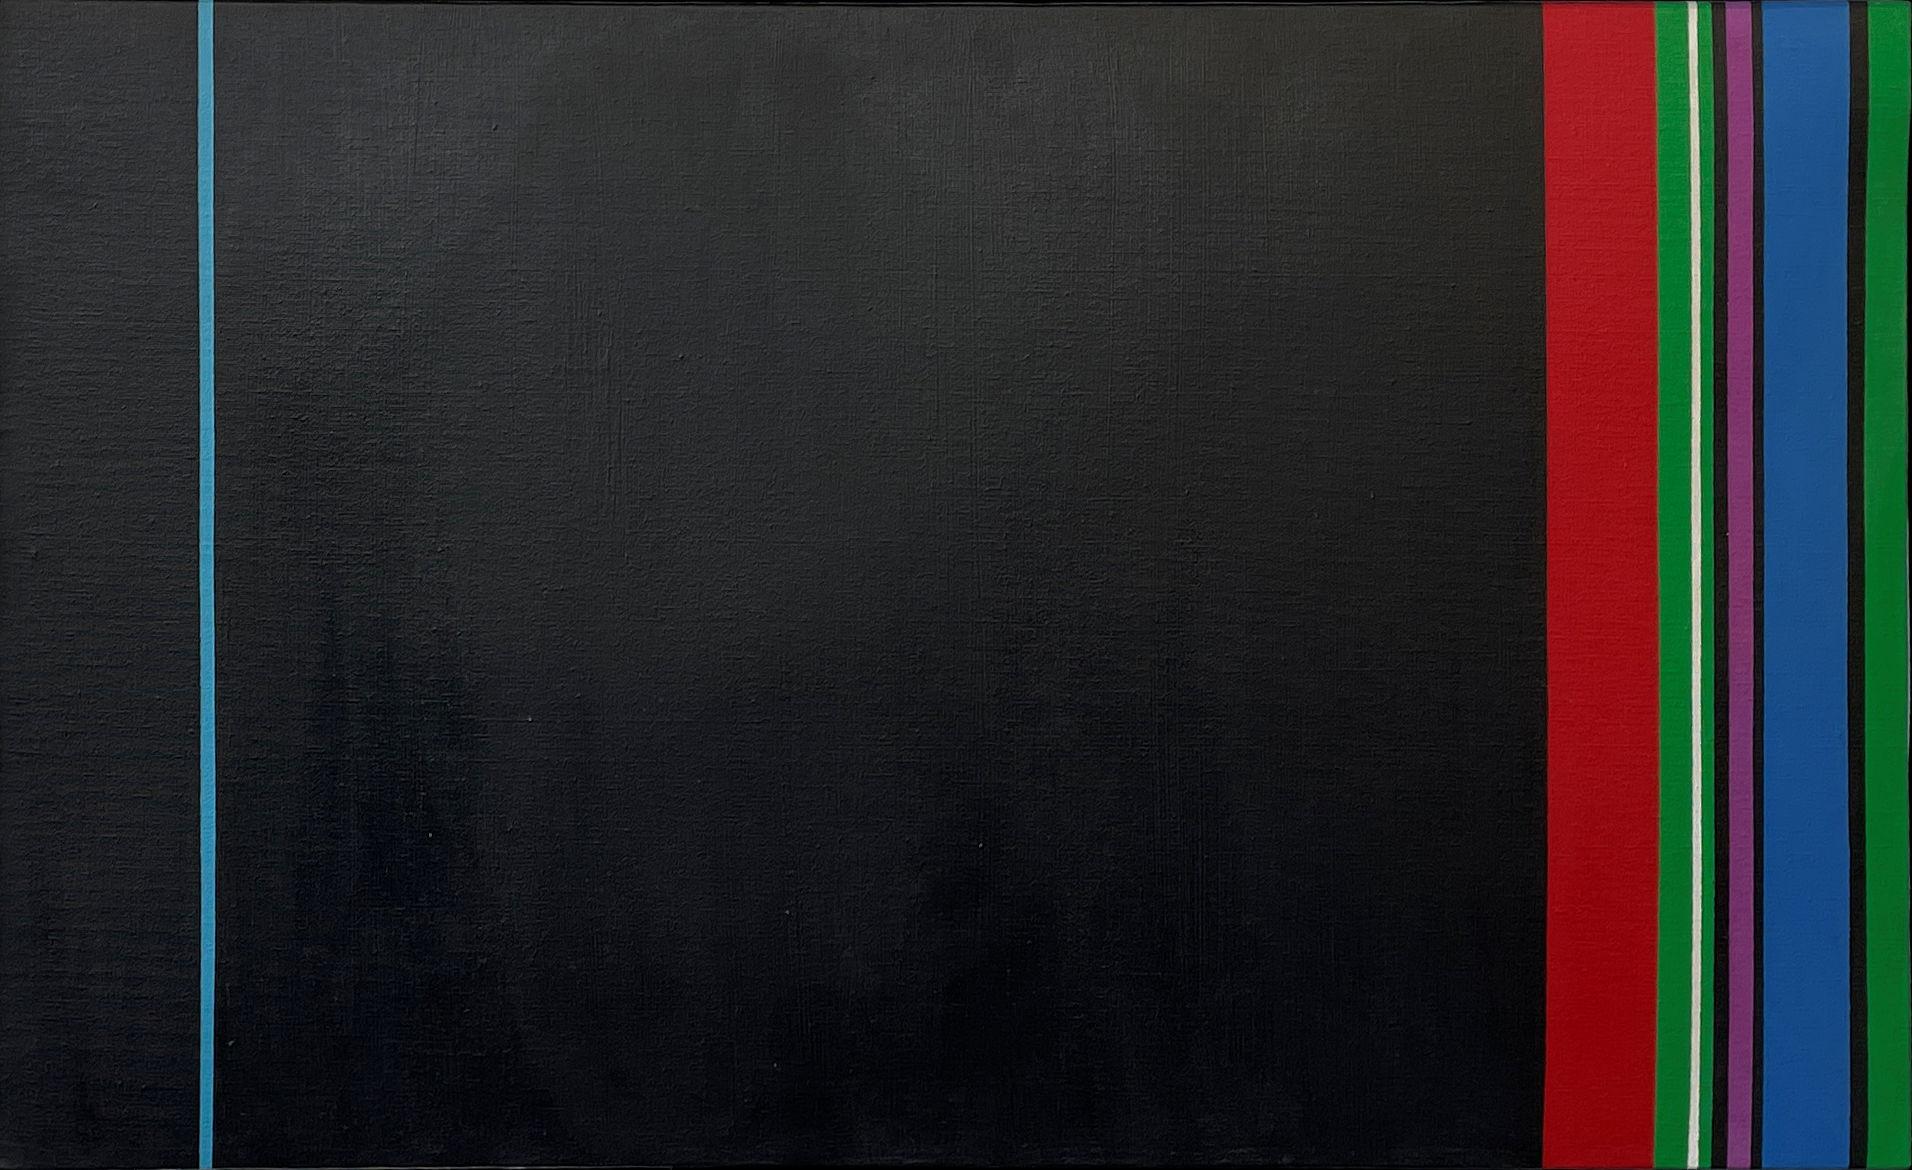 "Black Whole, " Jay Rosenblum, Color Field Abstract with Stripes